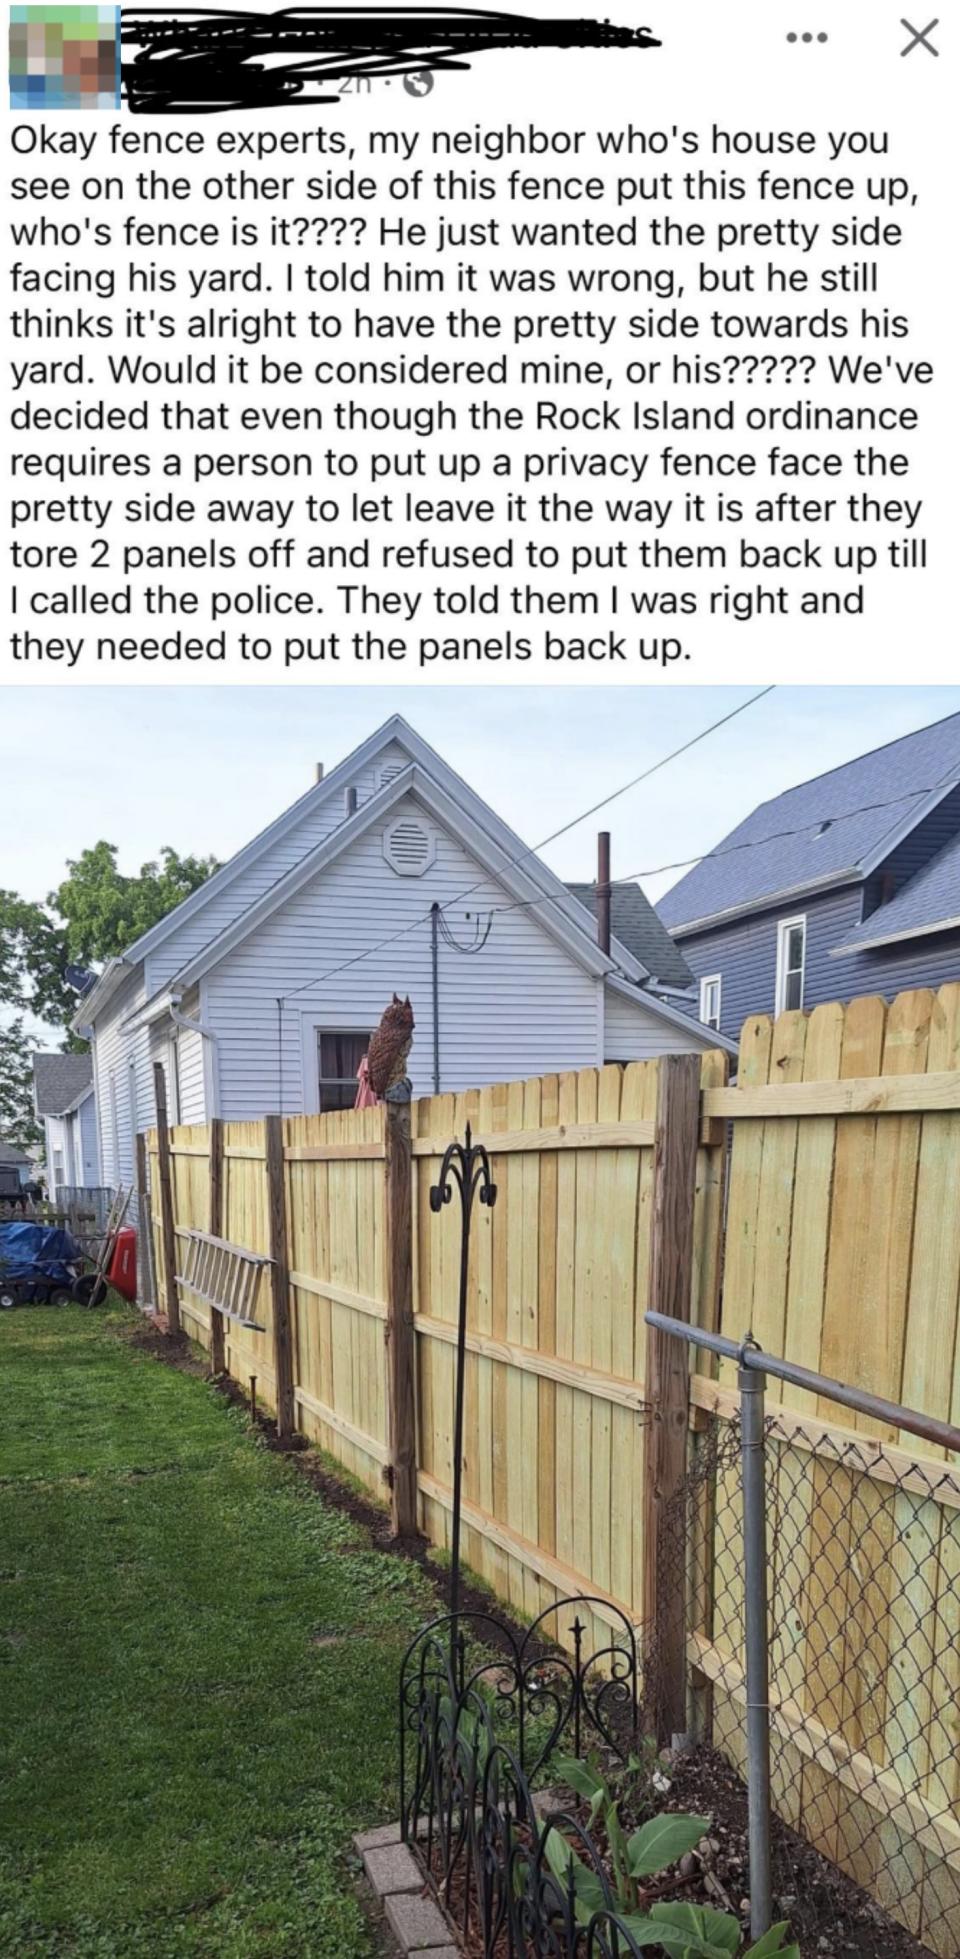 Facebook post about a neighbor putting up a fence with the pretty side facing the homeowner, asking if it's against Rock Island ordinance and sharing an encounter with the police who had the panels replaced